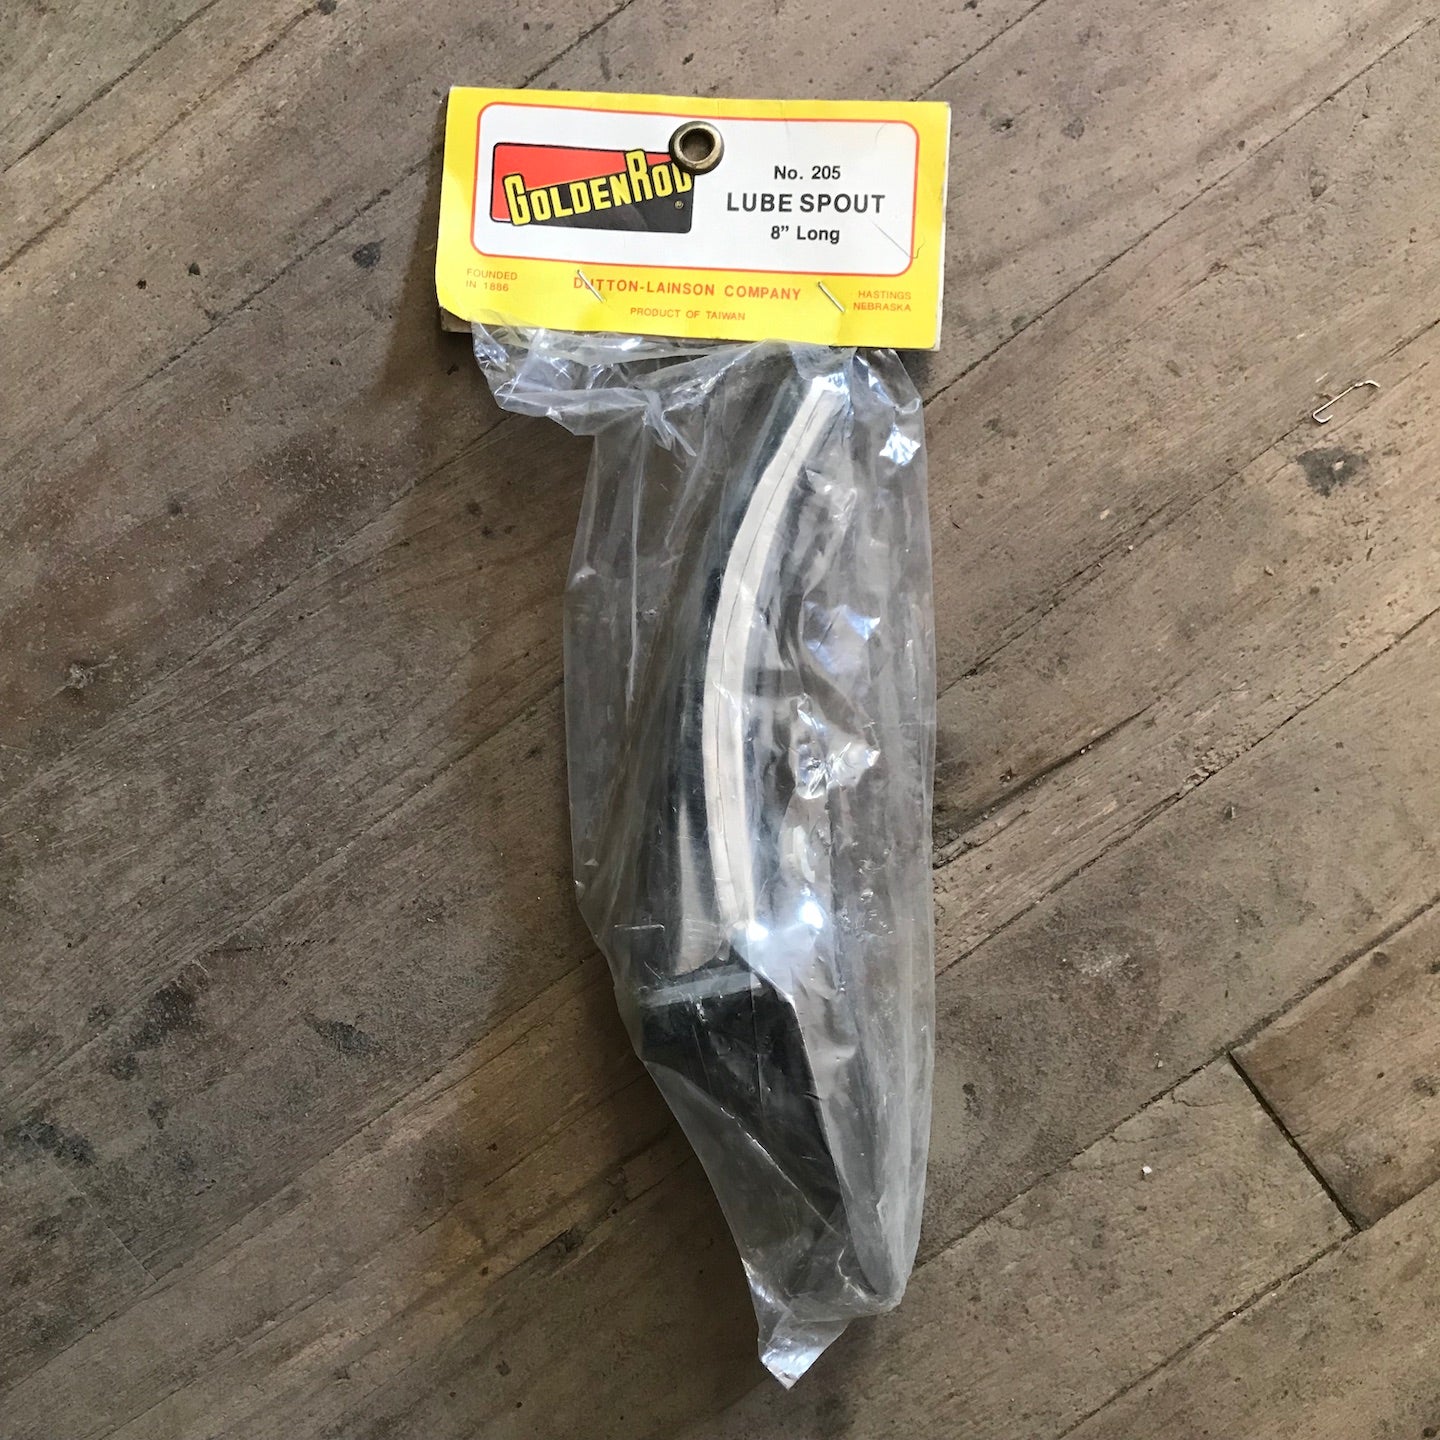 GoldenRod 8" Lube Spout No. 205 (205)